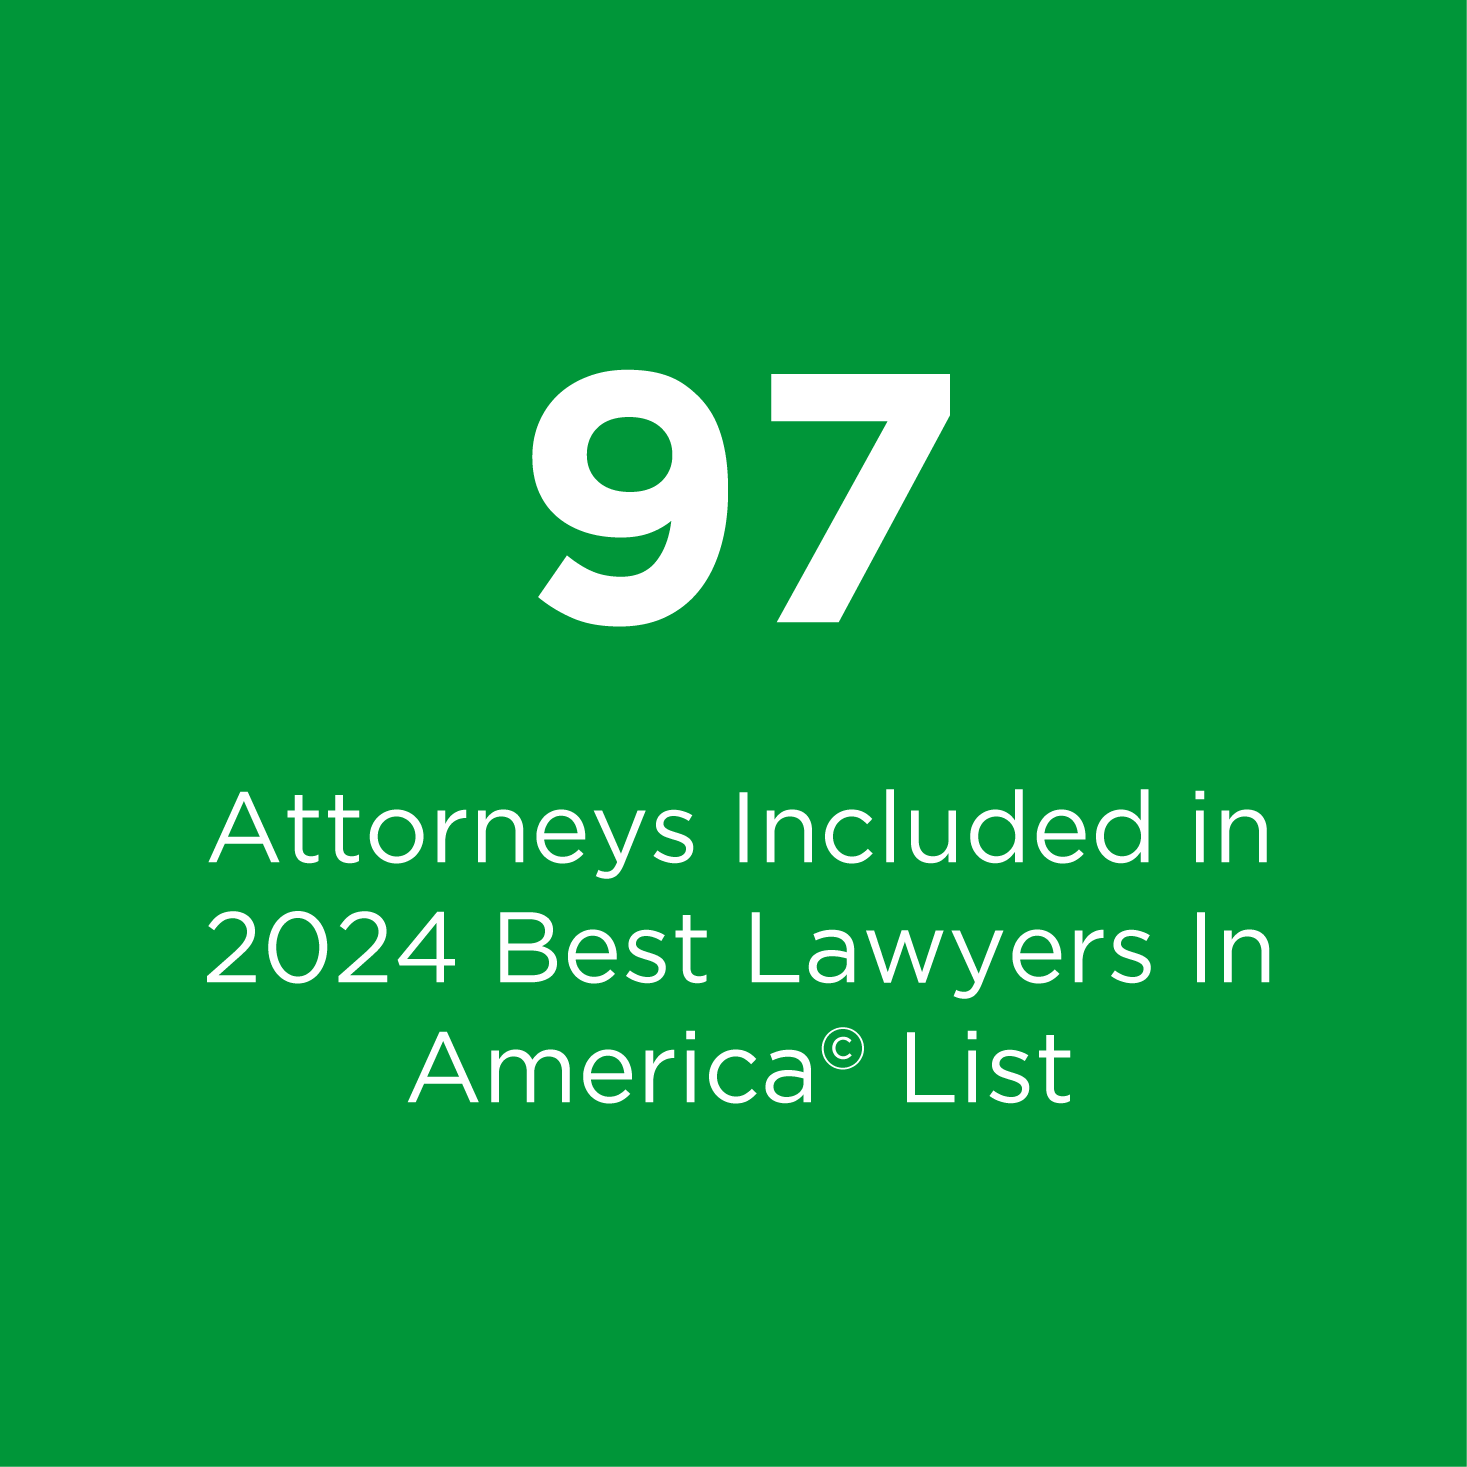 News - 97 Attorneys Included in 2024 Best Lawyers In America© List - 2024